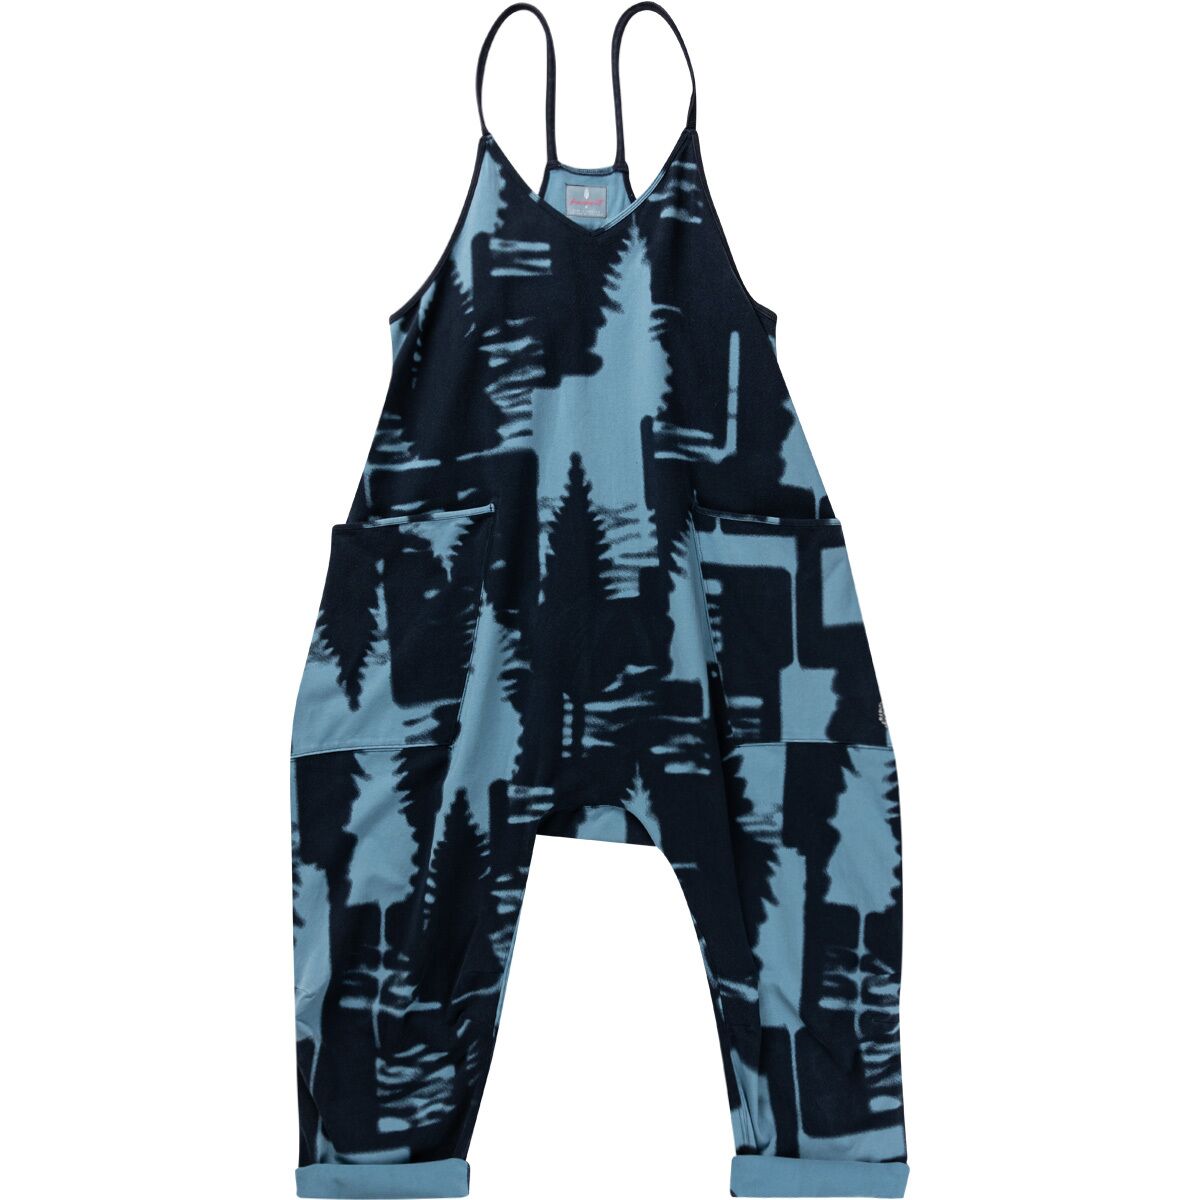 FP Movement Hot Shot Printed One-Piece - Women's